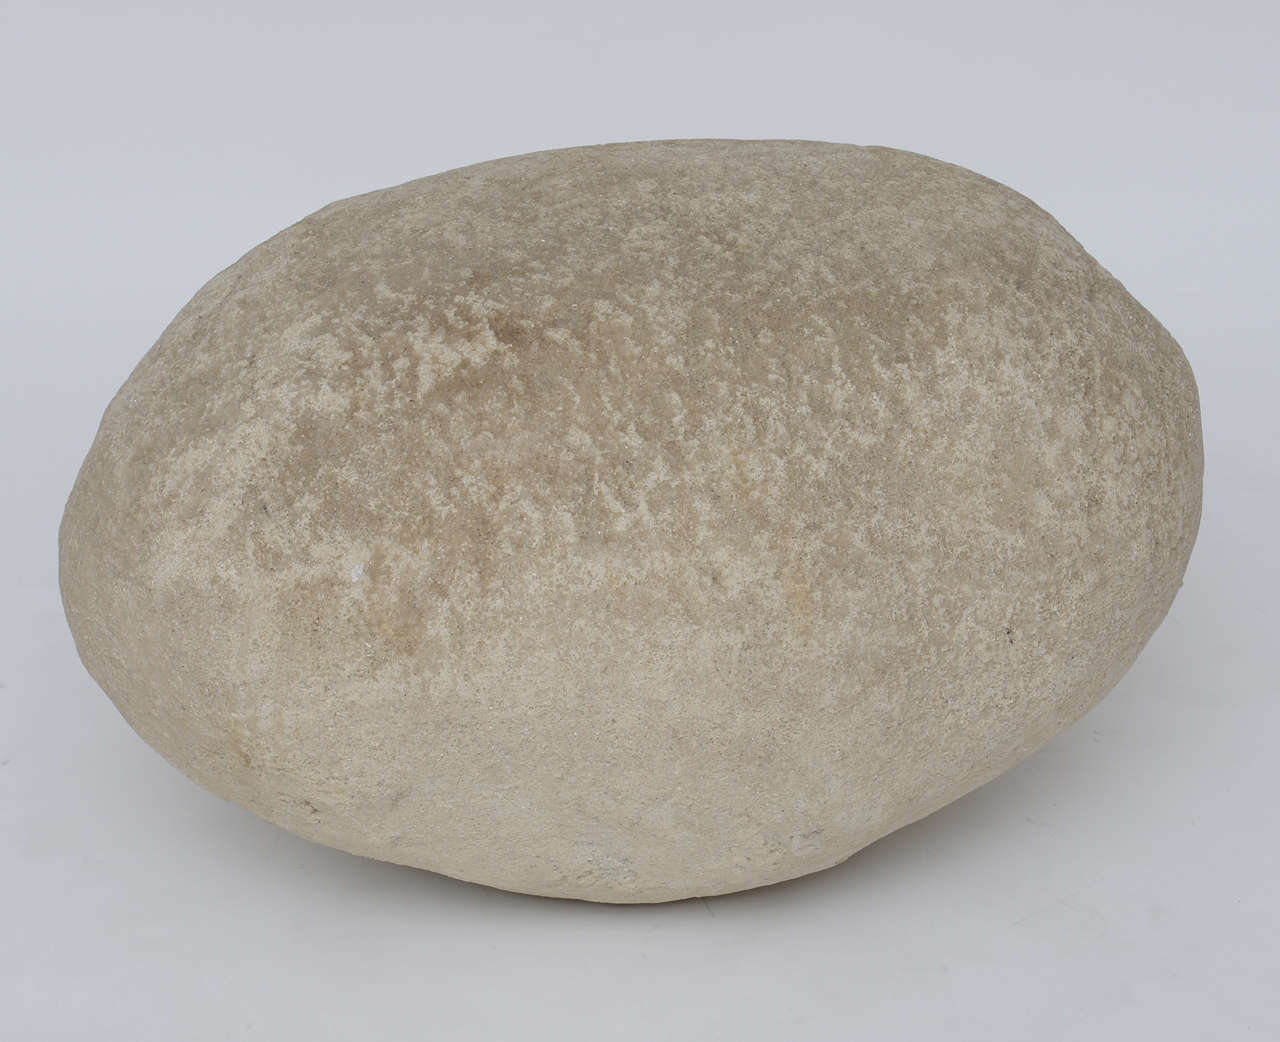 Very large molded fiberglass lamp by Andre Cazenave for Atelier A, mimics the look and texture of natural rock. Part of a much larger collection of 17 Cazenave rocks, most with original labels intact.